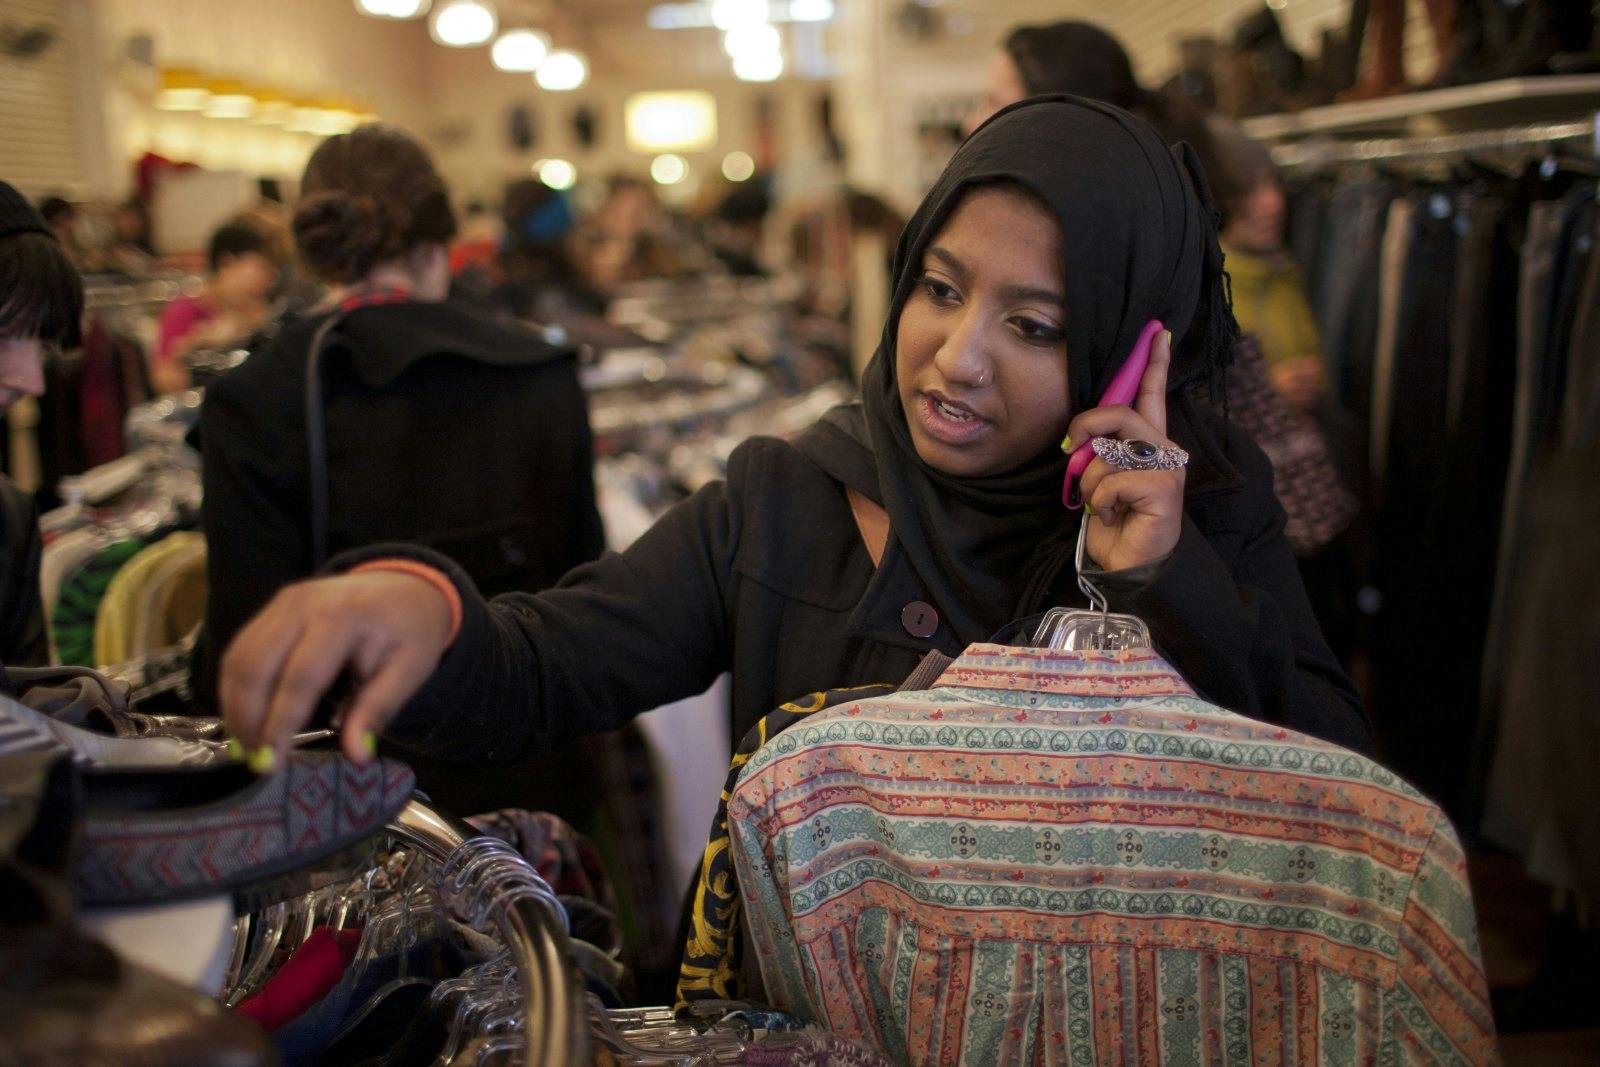 Sharmin Hossain, a 20 year old Bangladeshi-American, speaks on her cell phone while shopping January 2, 2012 in a thrift store in Brooklyn, New York (Robert Nickelsberg/Getty Images)